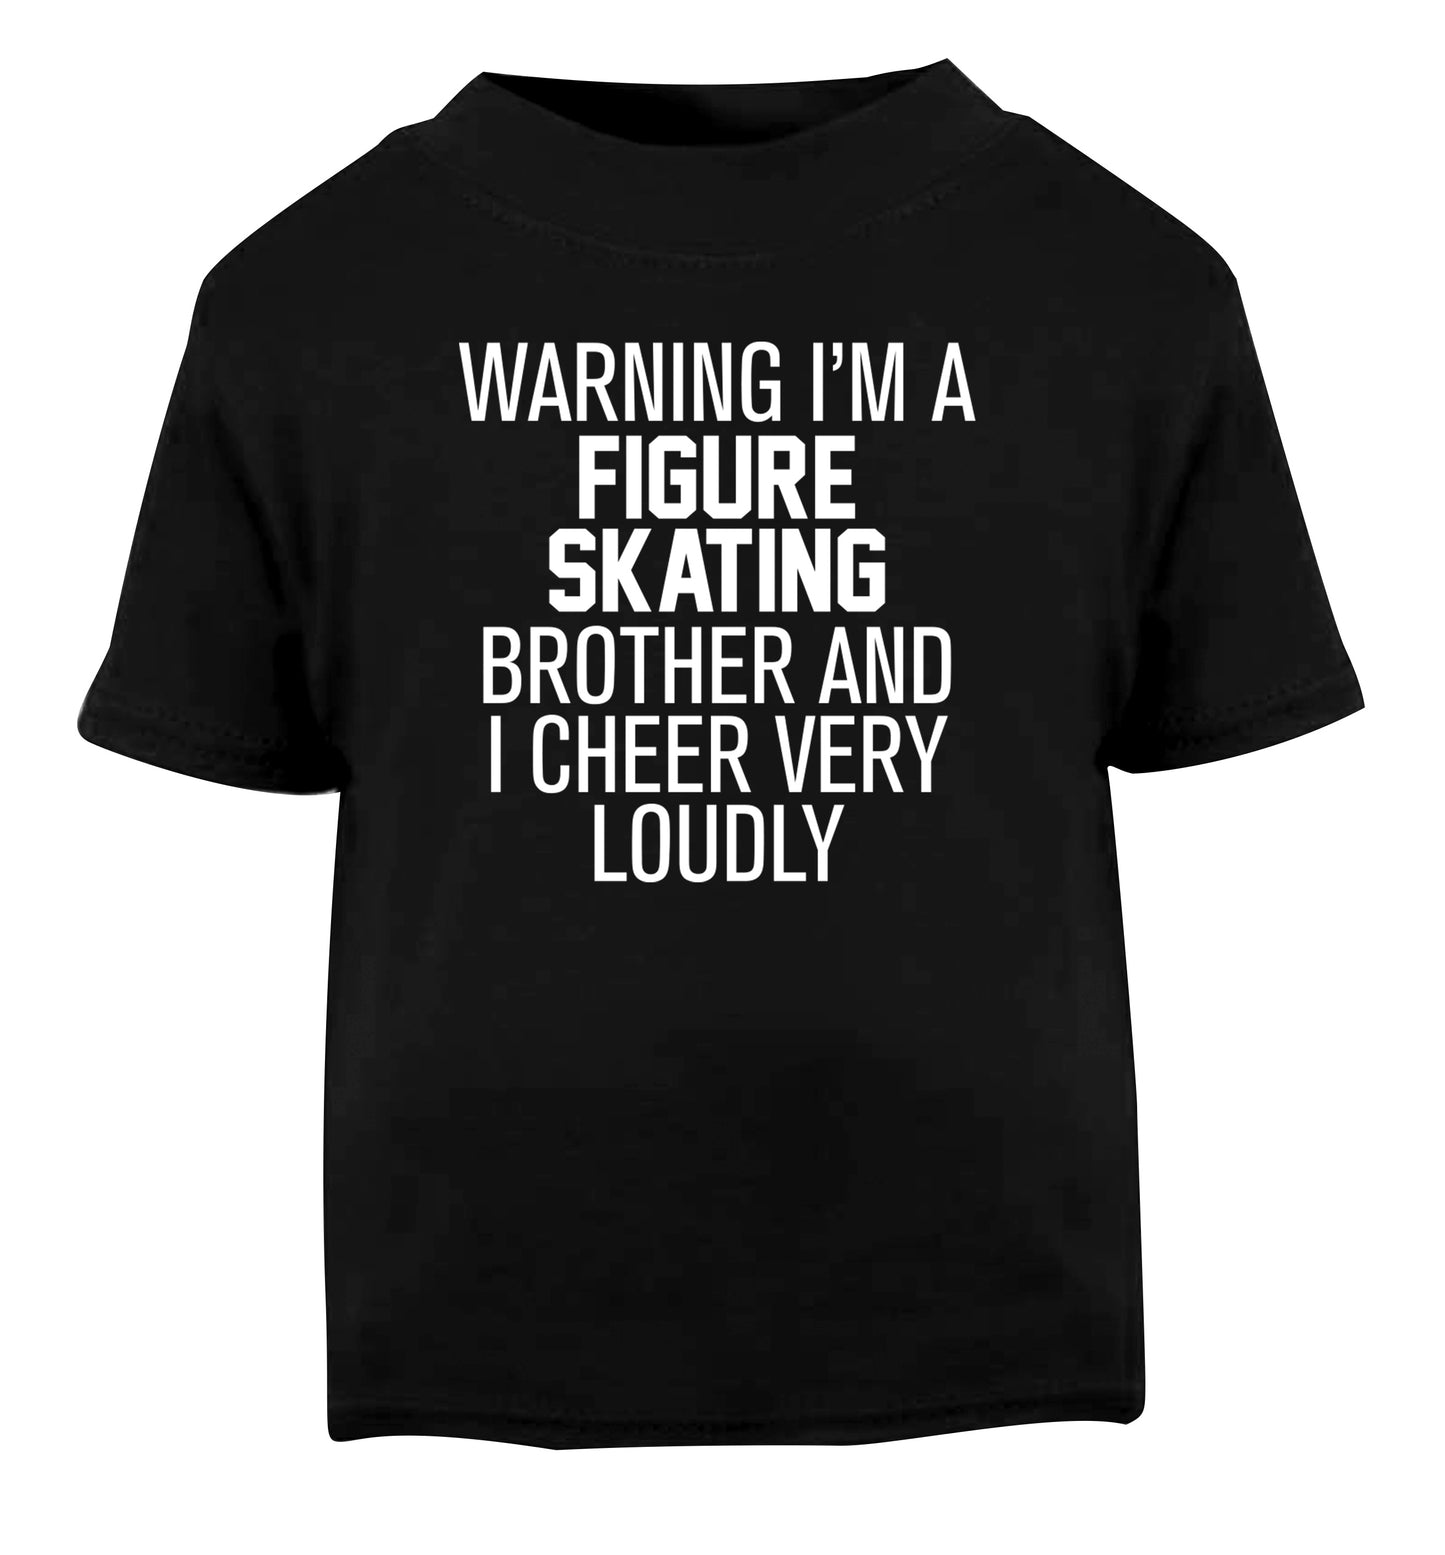 Warning I'm a figure skating brother and I cheer very loudly Black Baby Toddler Tshirt 2 years